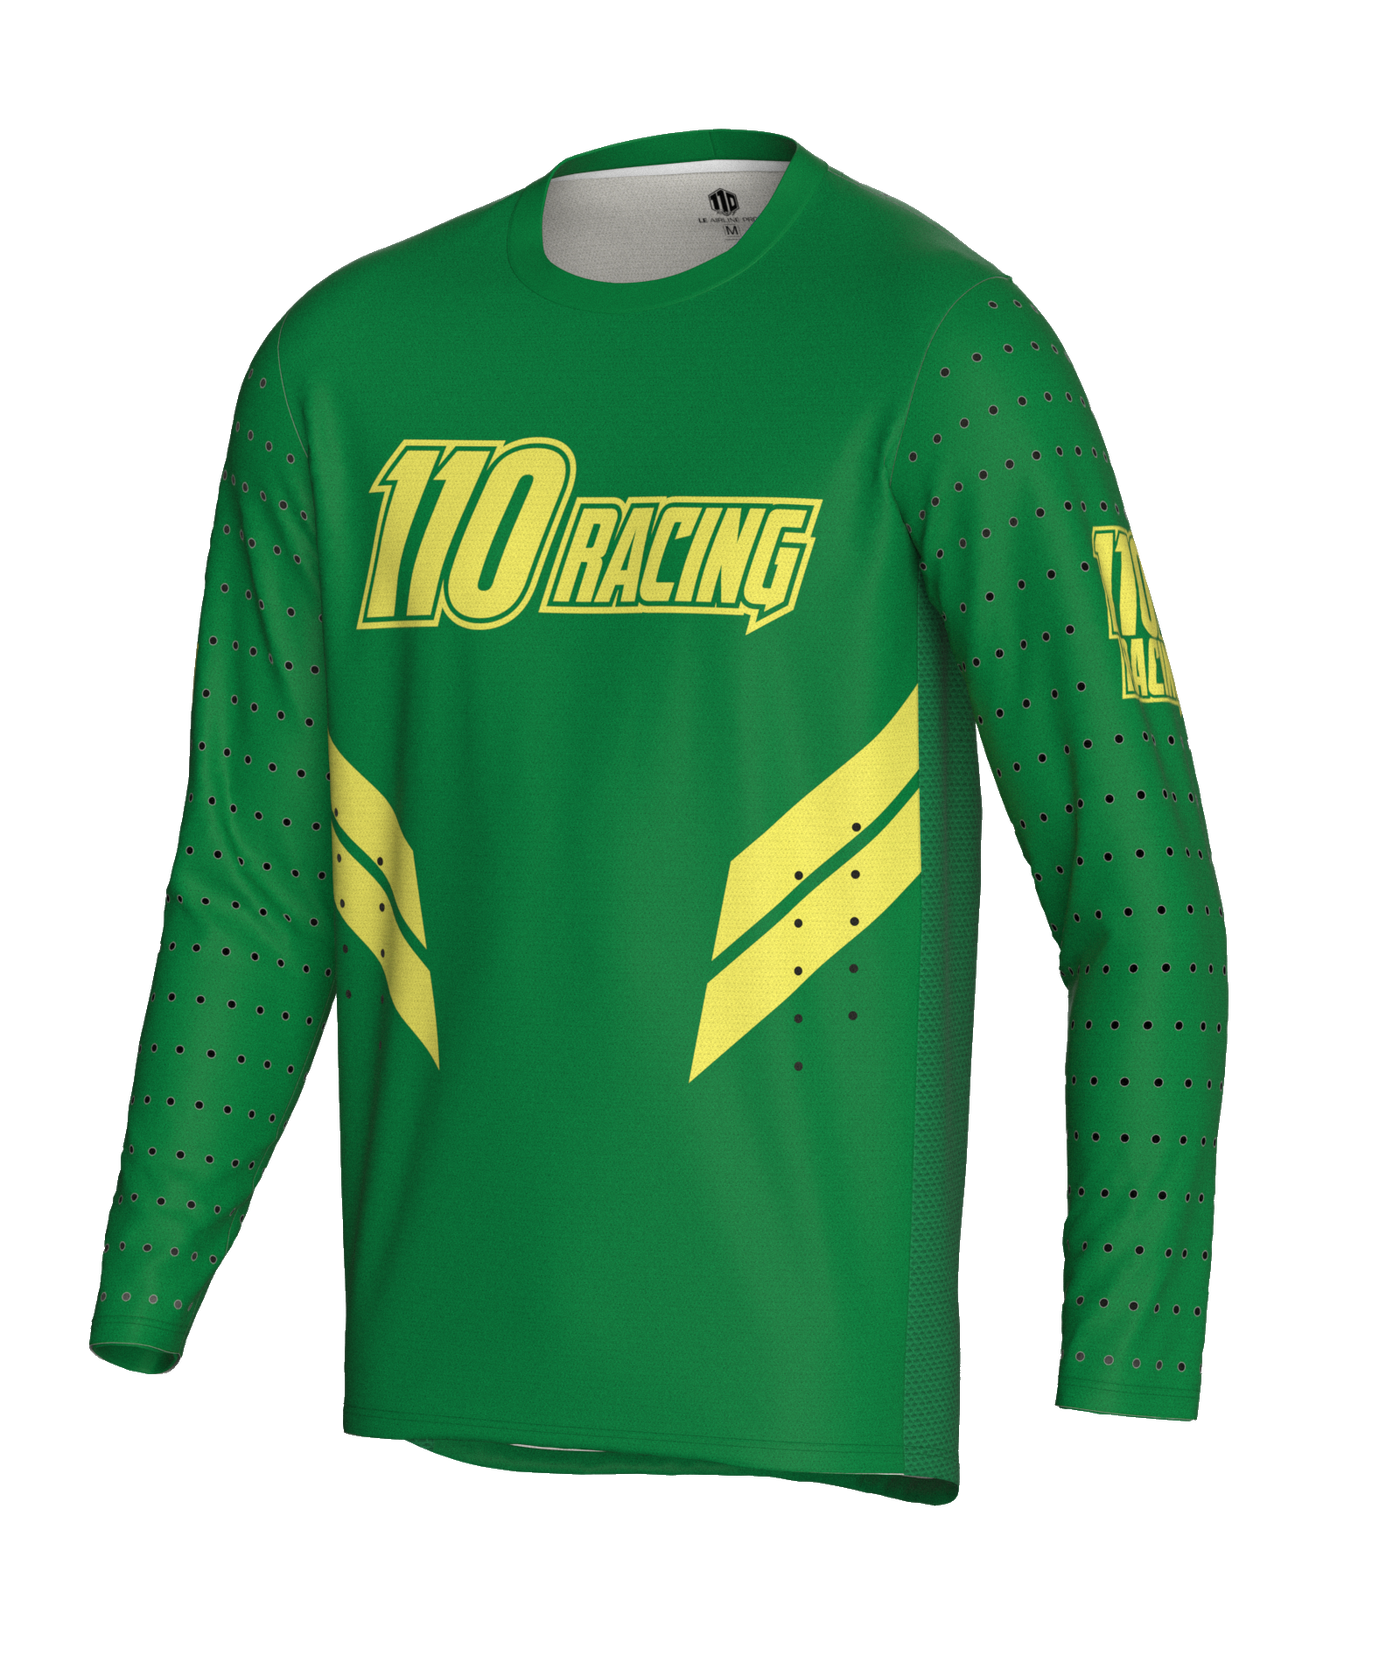 110 RACING // LE AIRLINE PRO